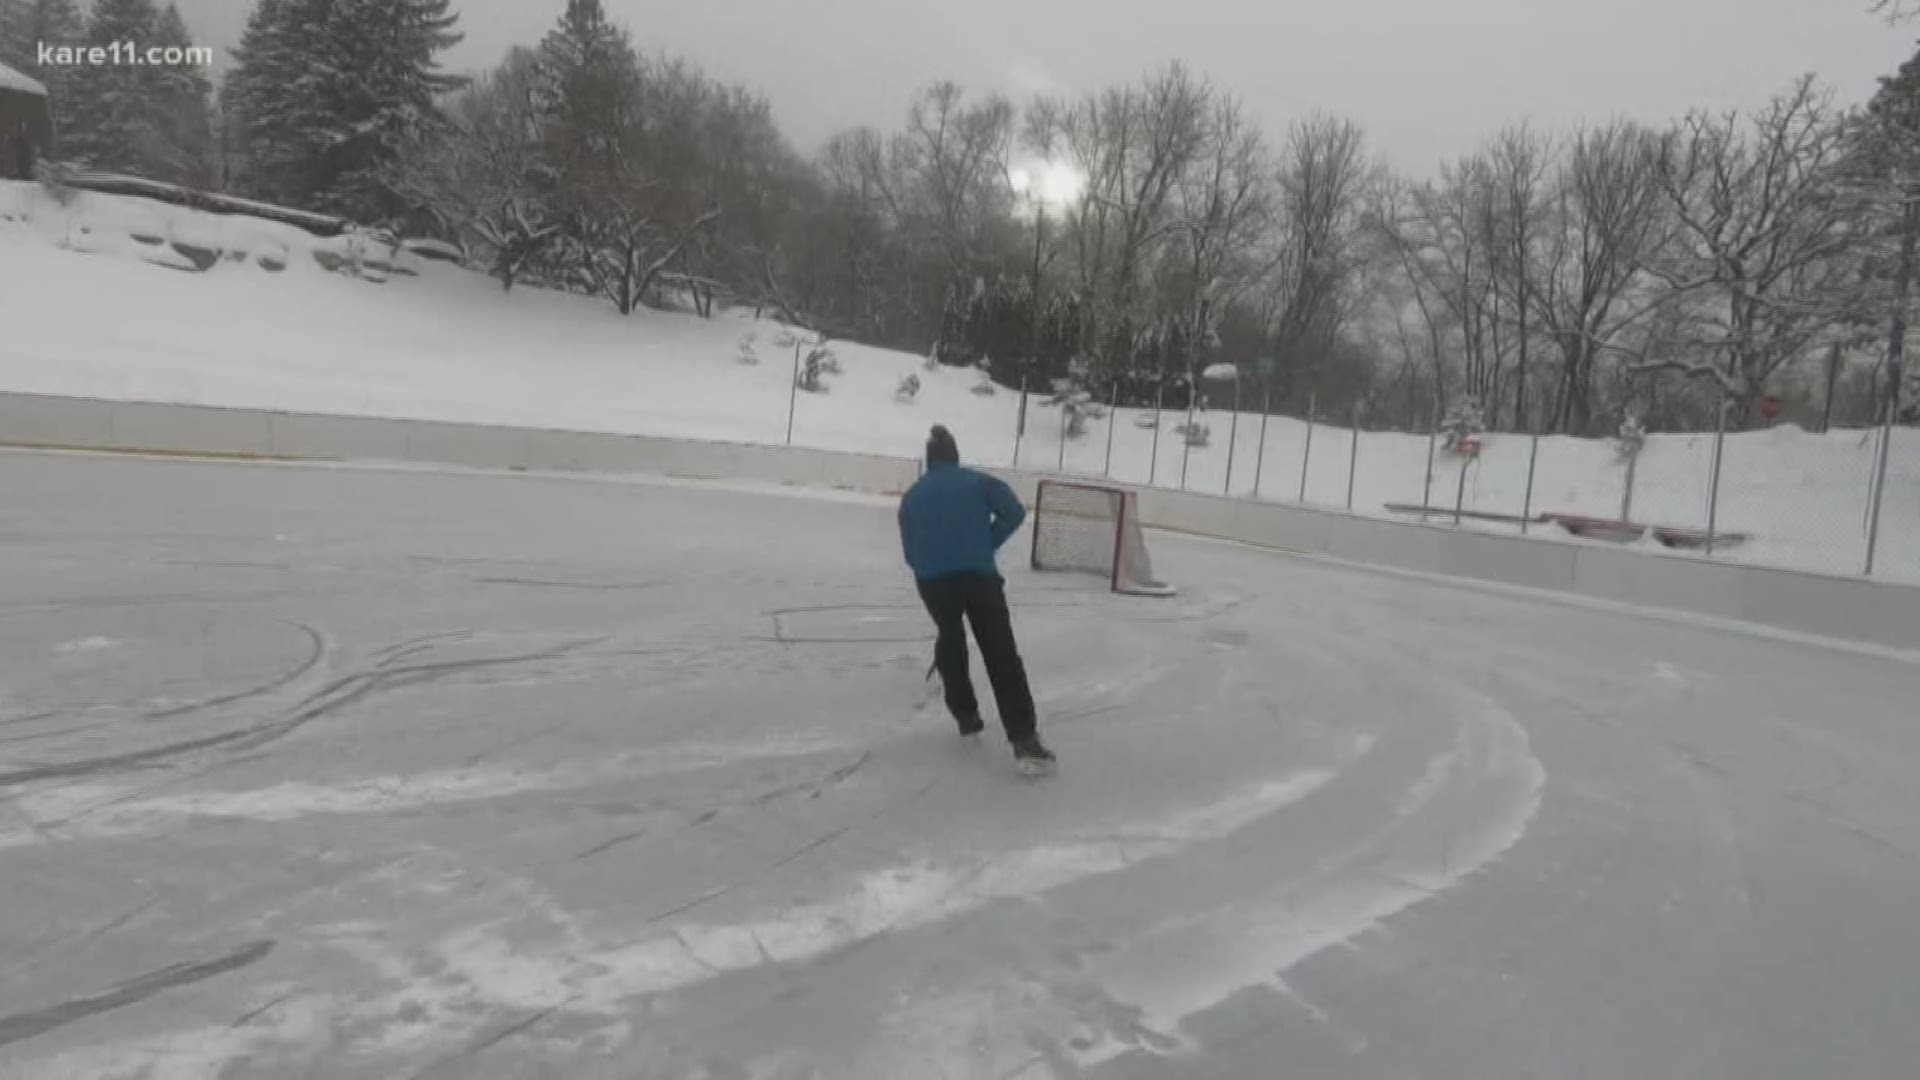 A neighborhood in Long Lake has taken pond hockey to another level by transforming a pond into an Olympic-sized hockey rink. https://kare11.tv/2SxNr35